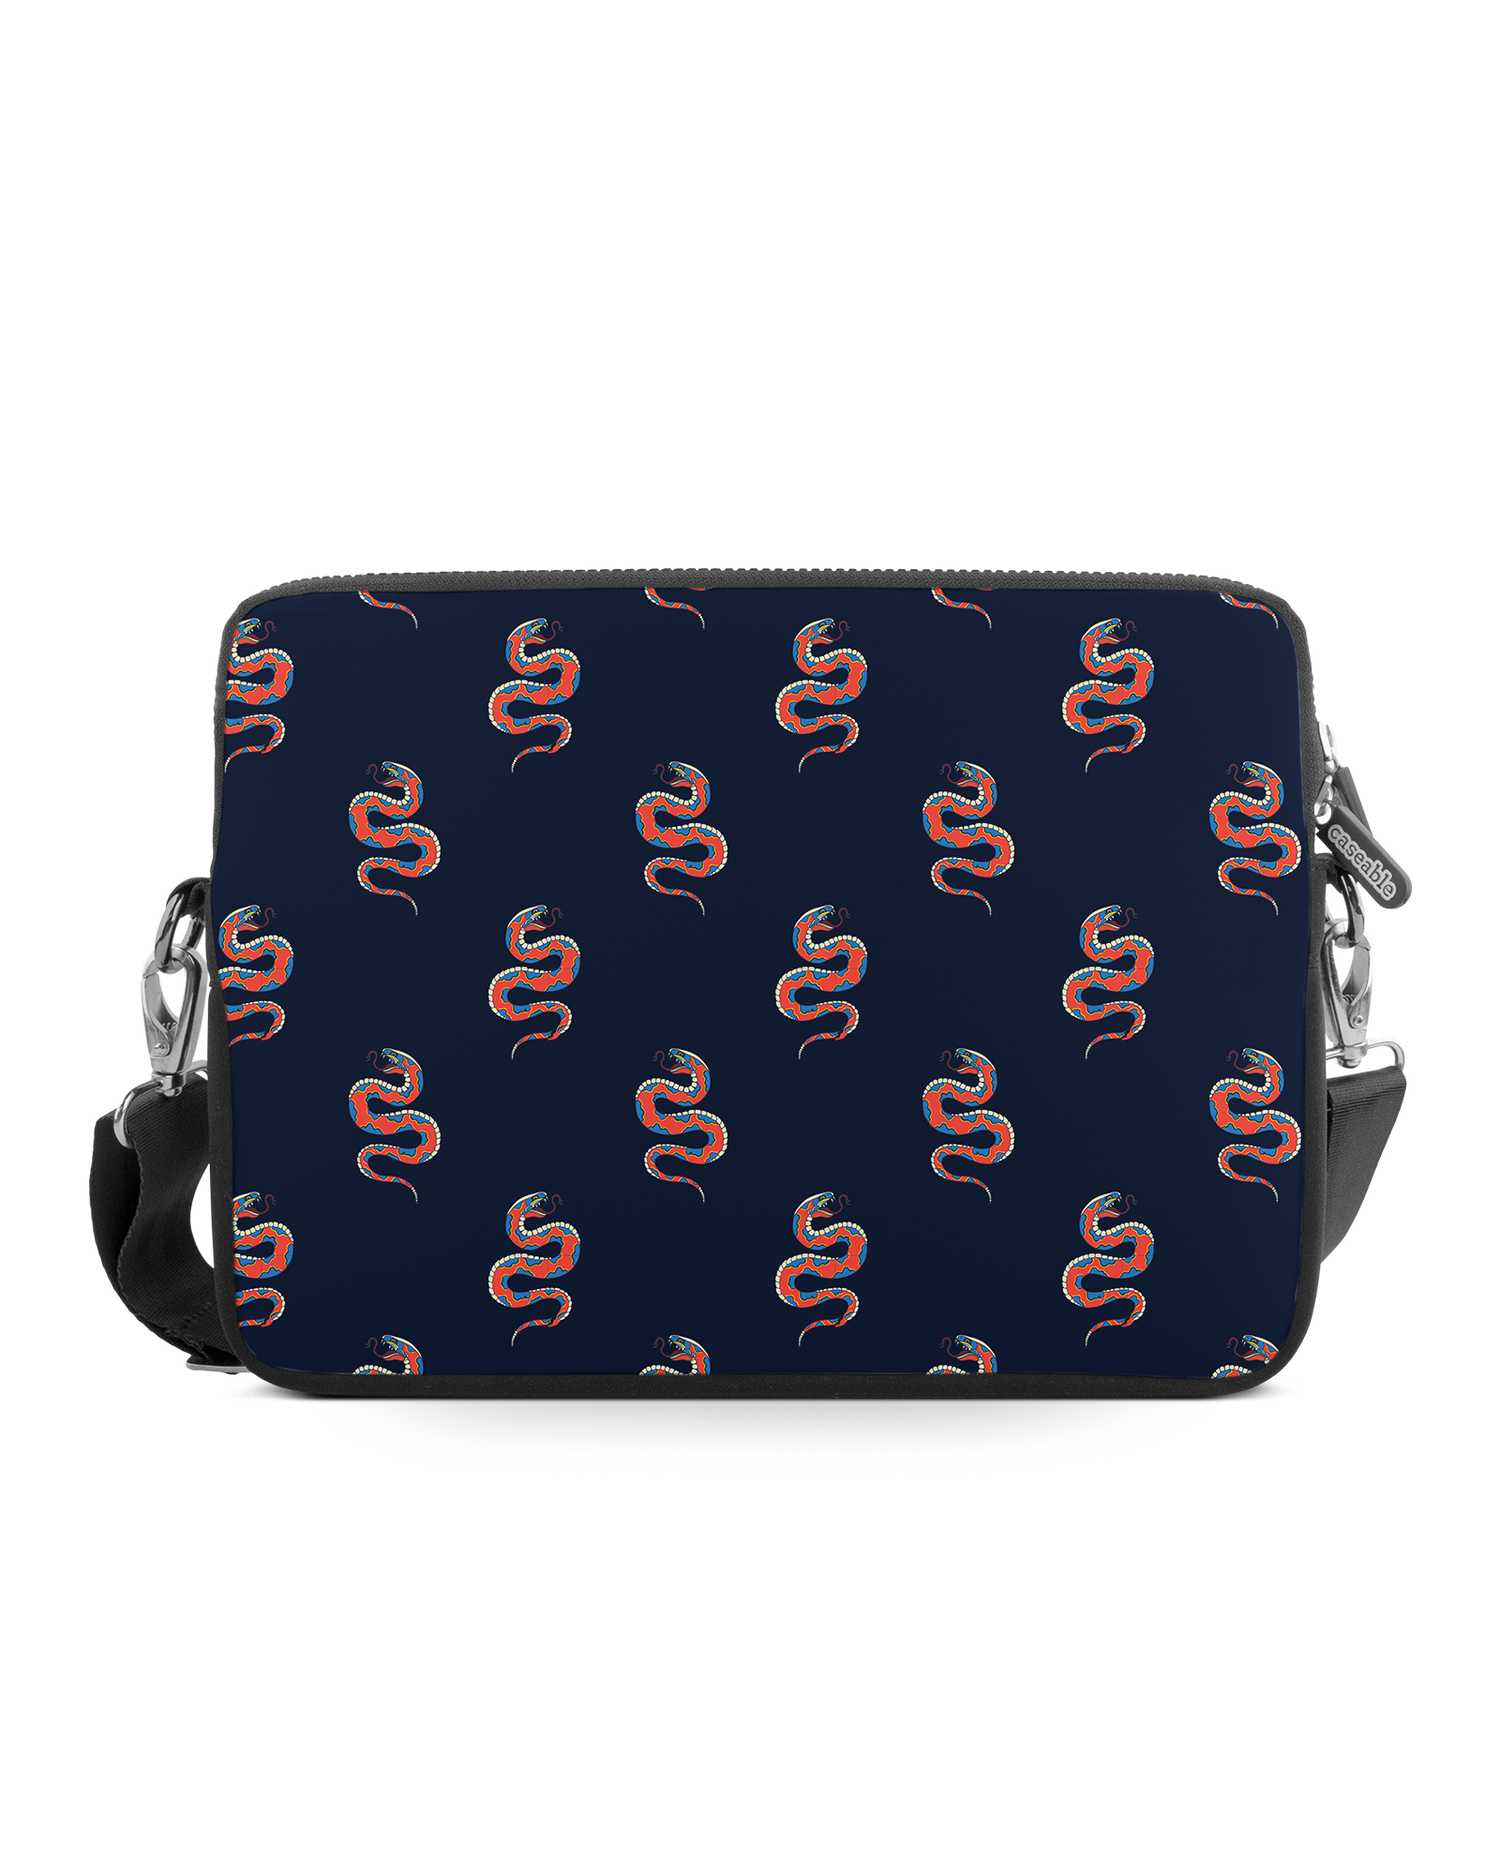 Repeating Snakes Premium Laptop Bag 15 inch: Front View